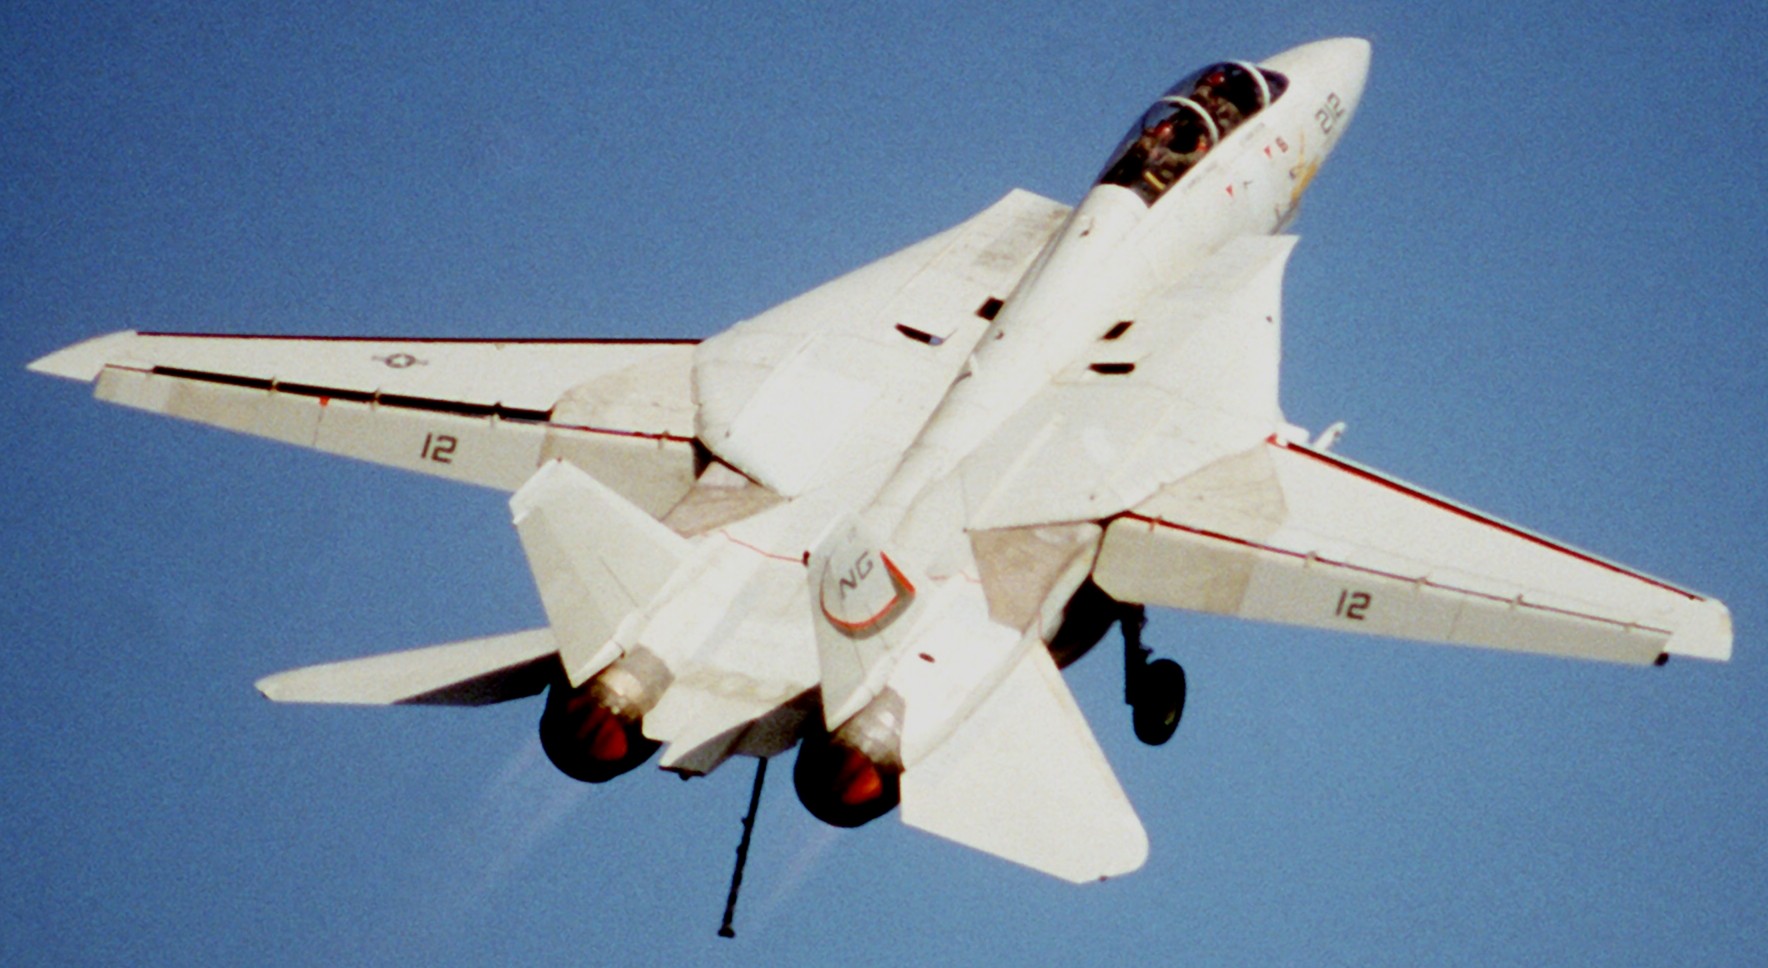 vf-24 fighting renegades fighter squadron navy f-14a tomcat carrier air wing cvw-9 uss constellation cv-64 32